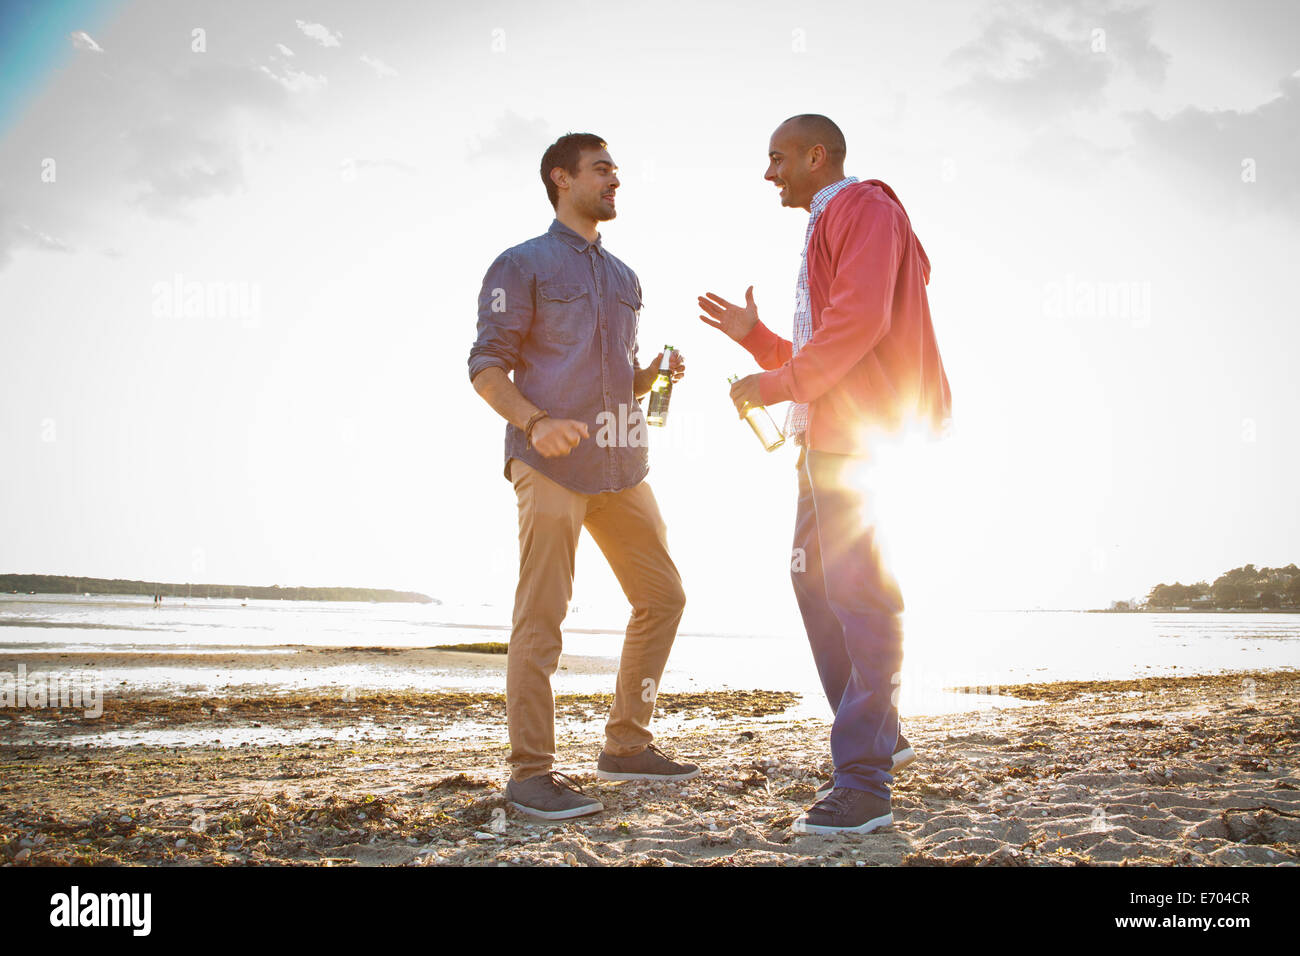 Men drinking beer and chatting on beach Stock Photo